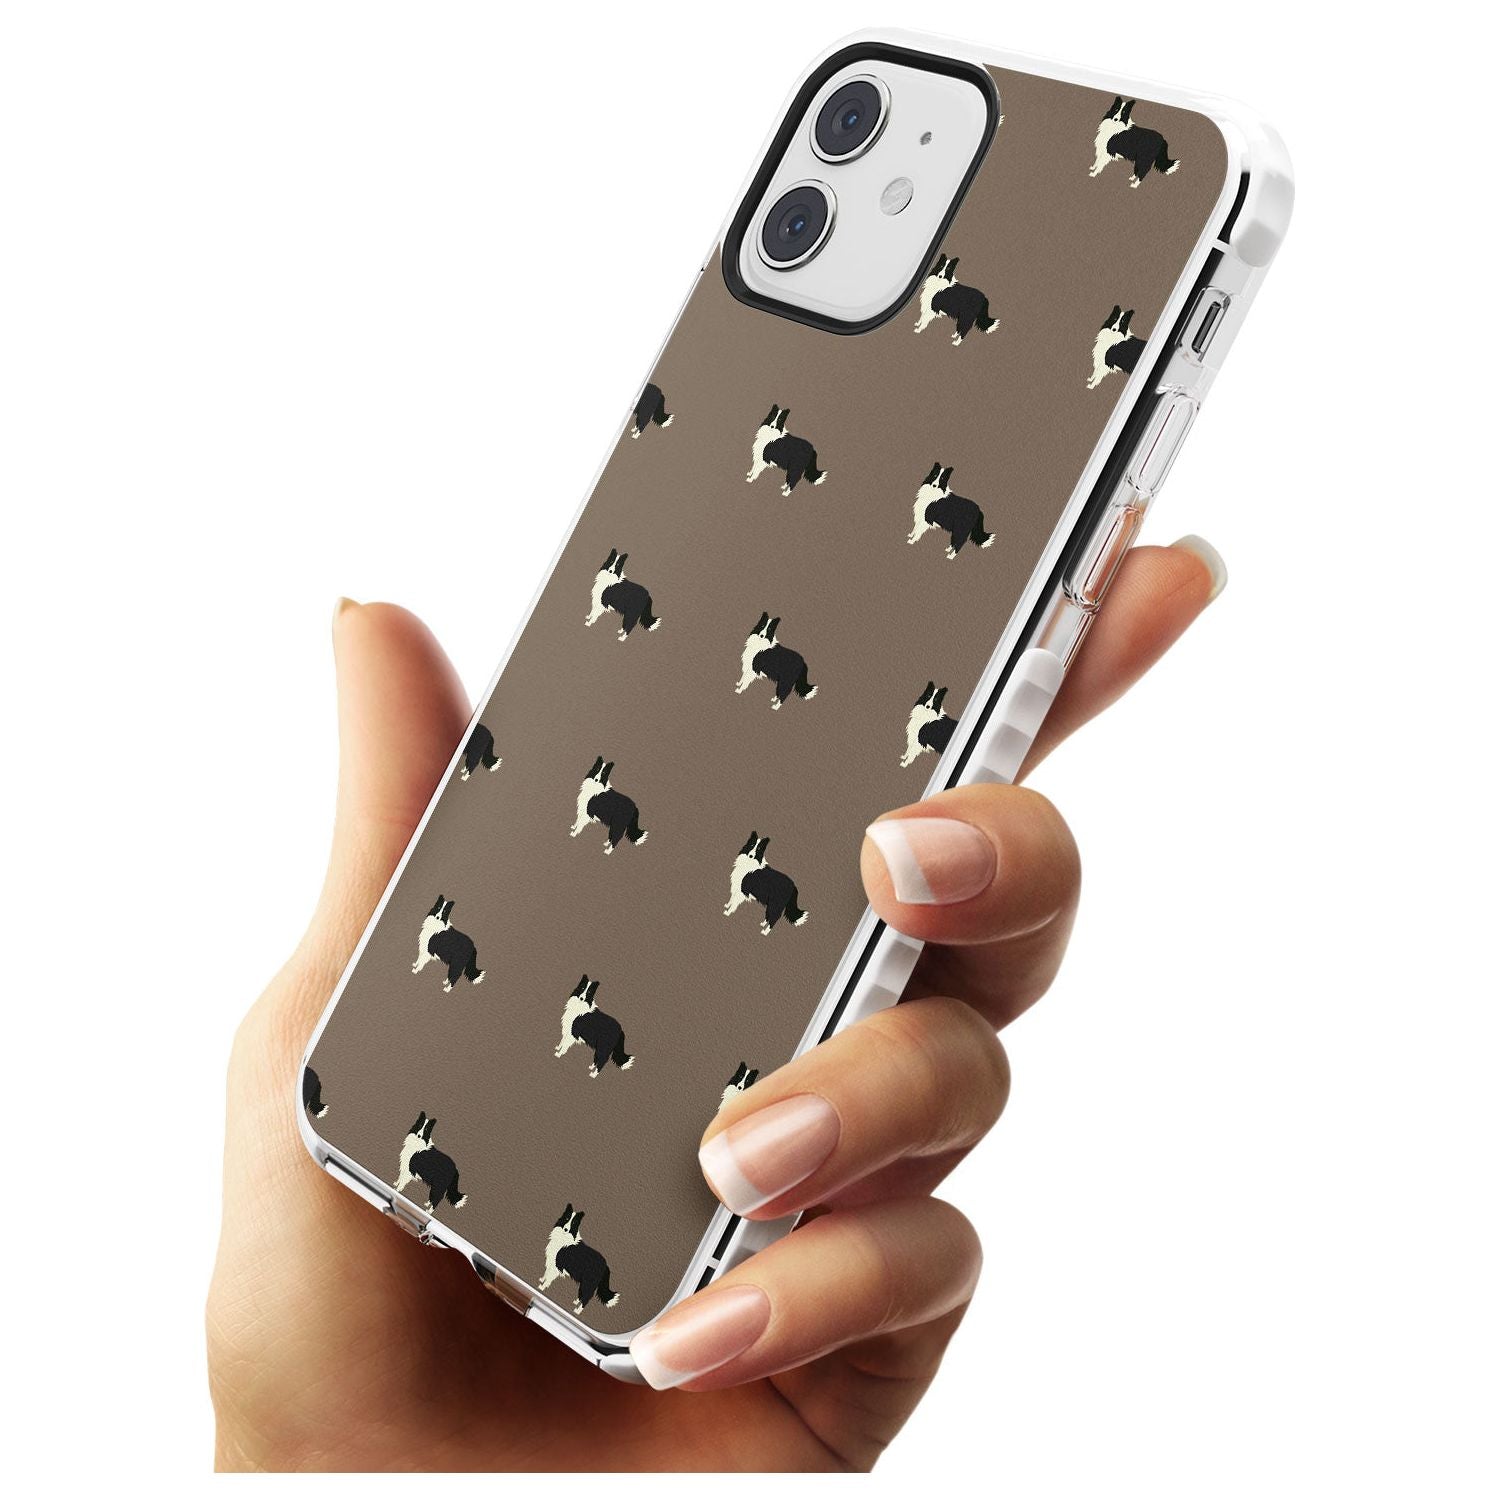 Border Collie Dog Pattern Impact Phone Case for iPhone 11